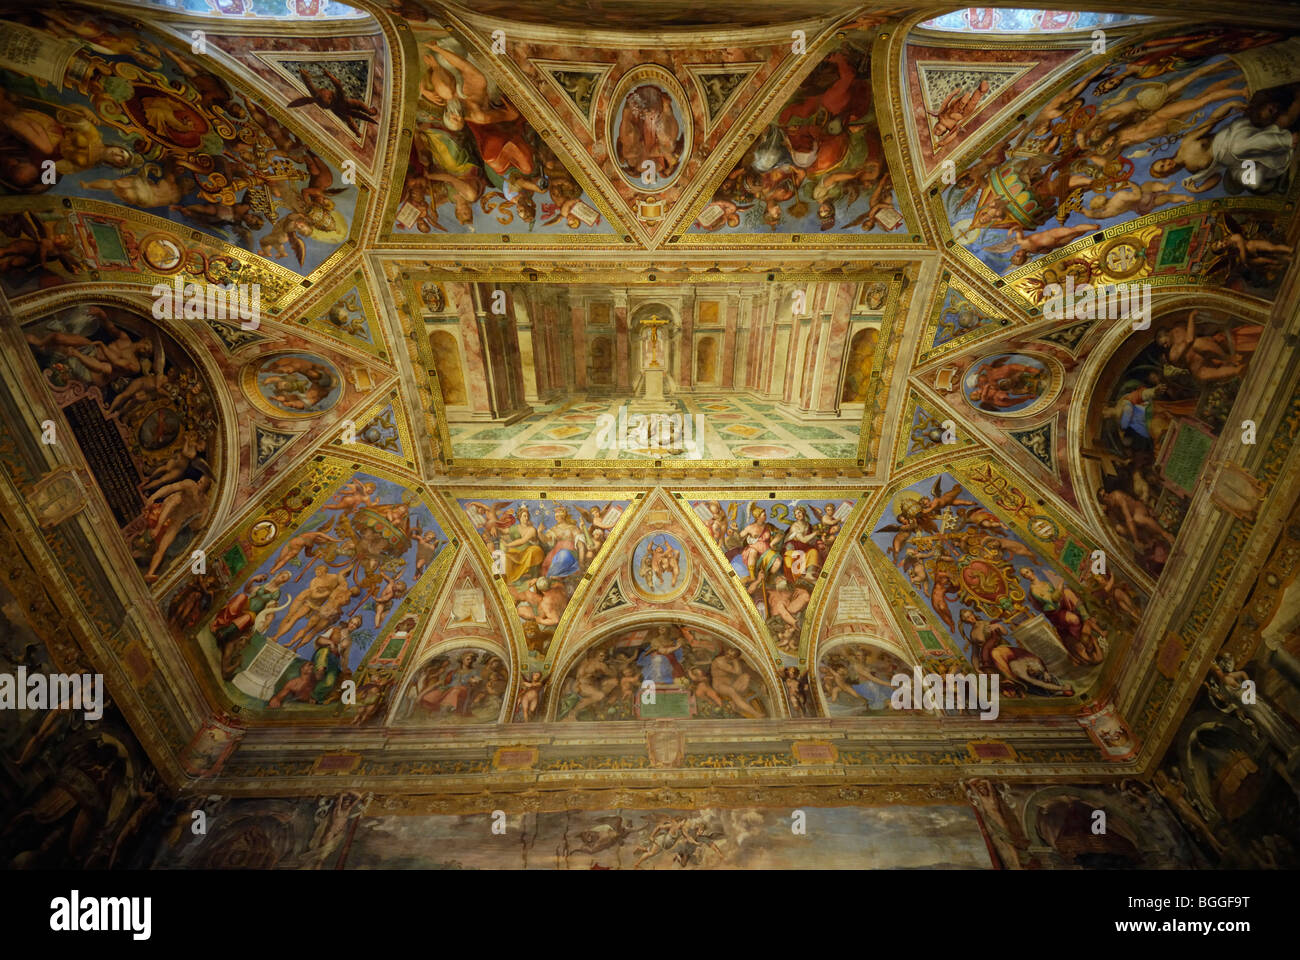 Ceiling of Sala di Costantino, Rome, Italy, low angle view Stock Photo